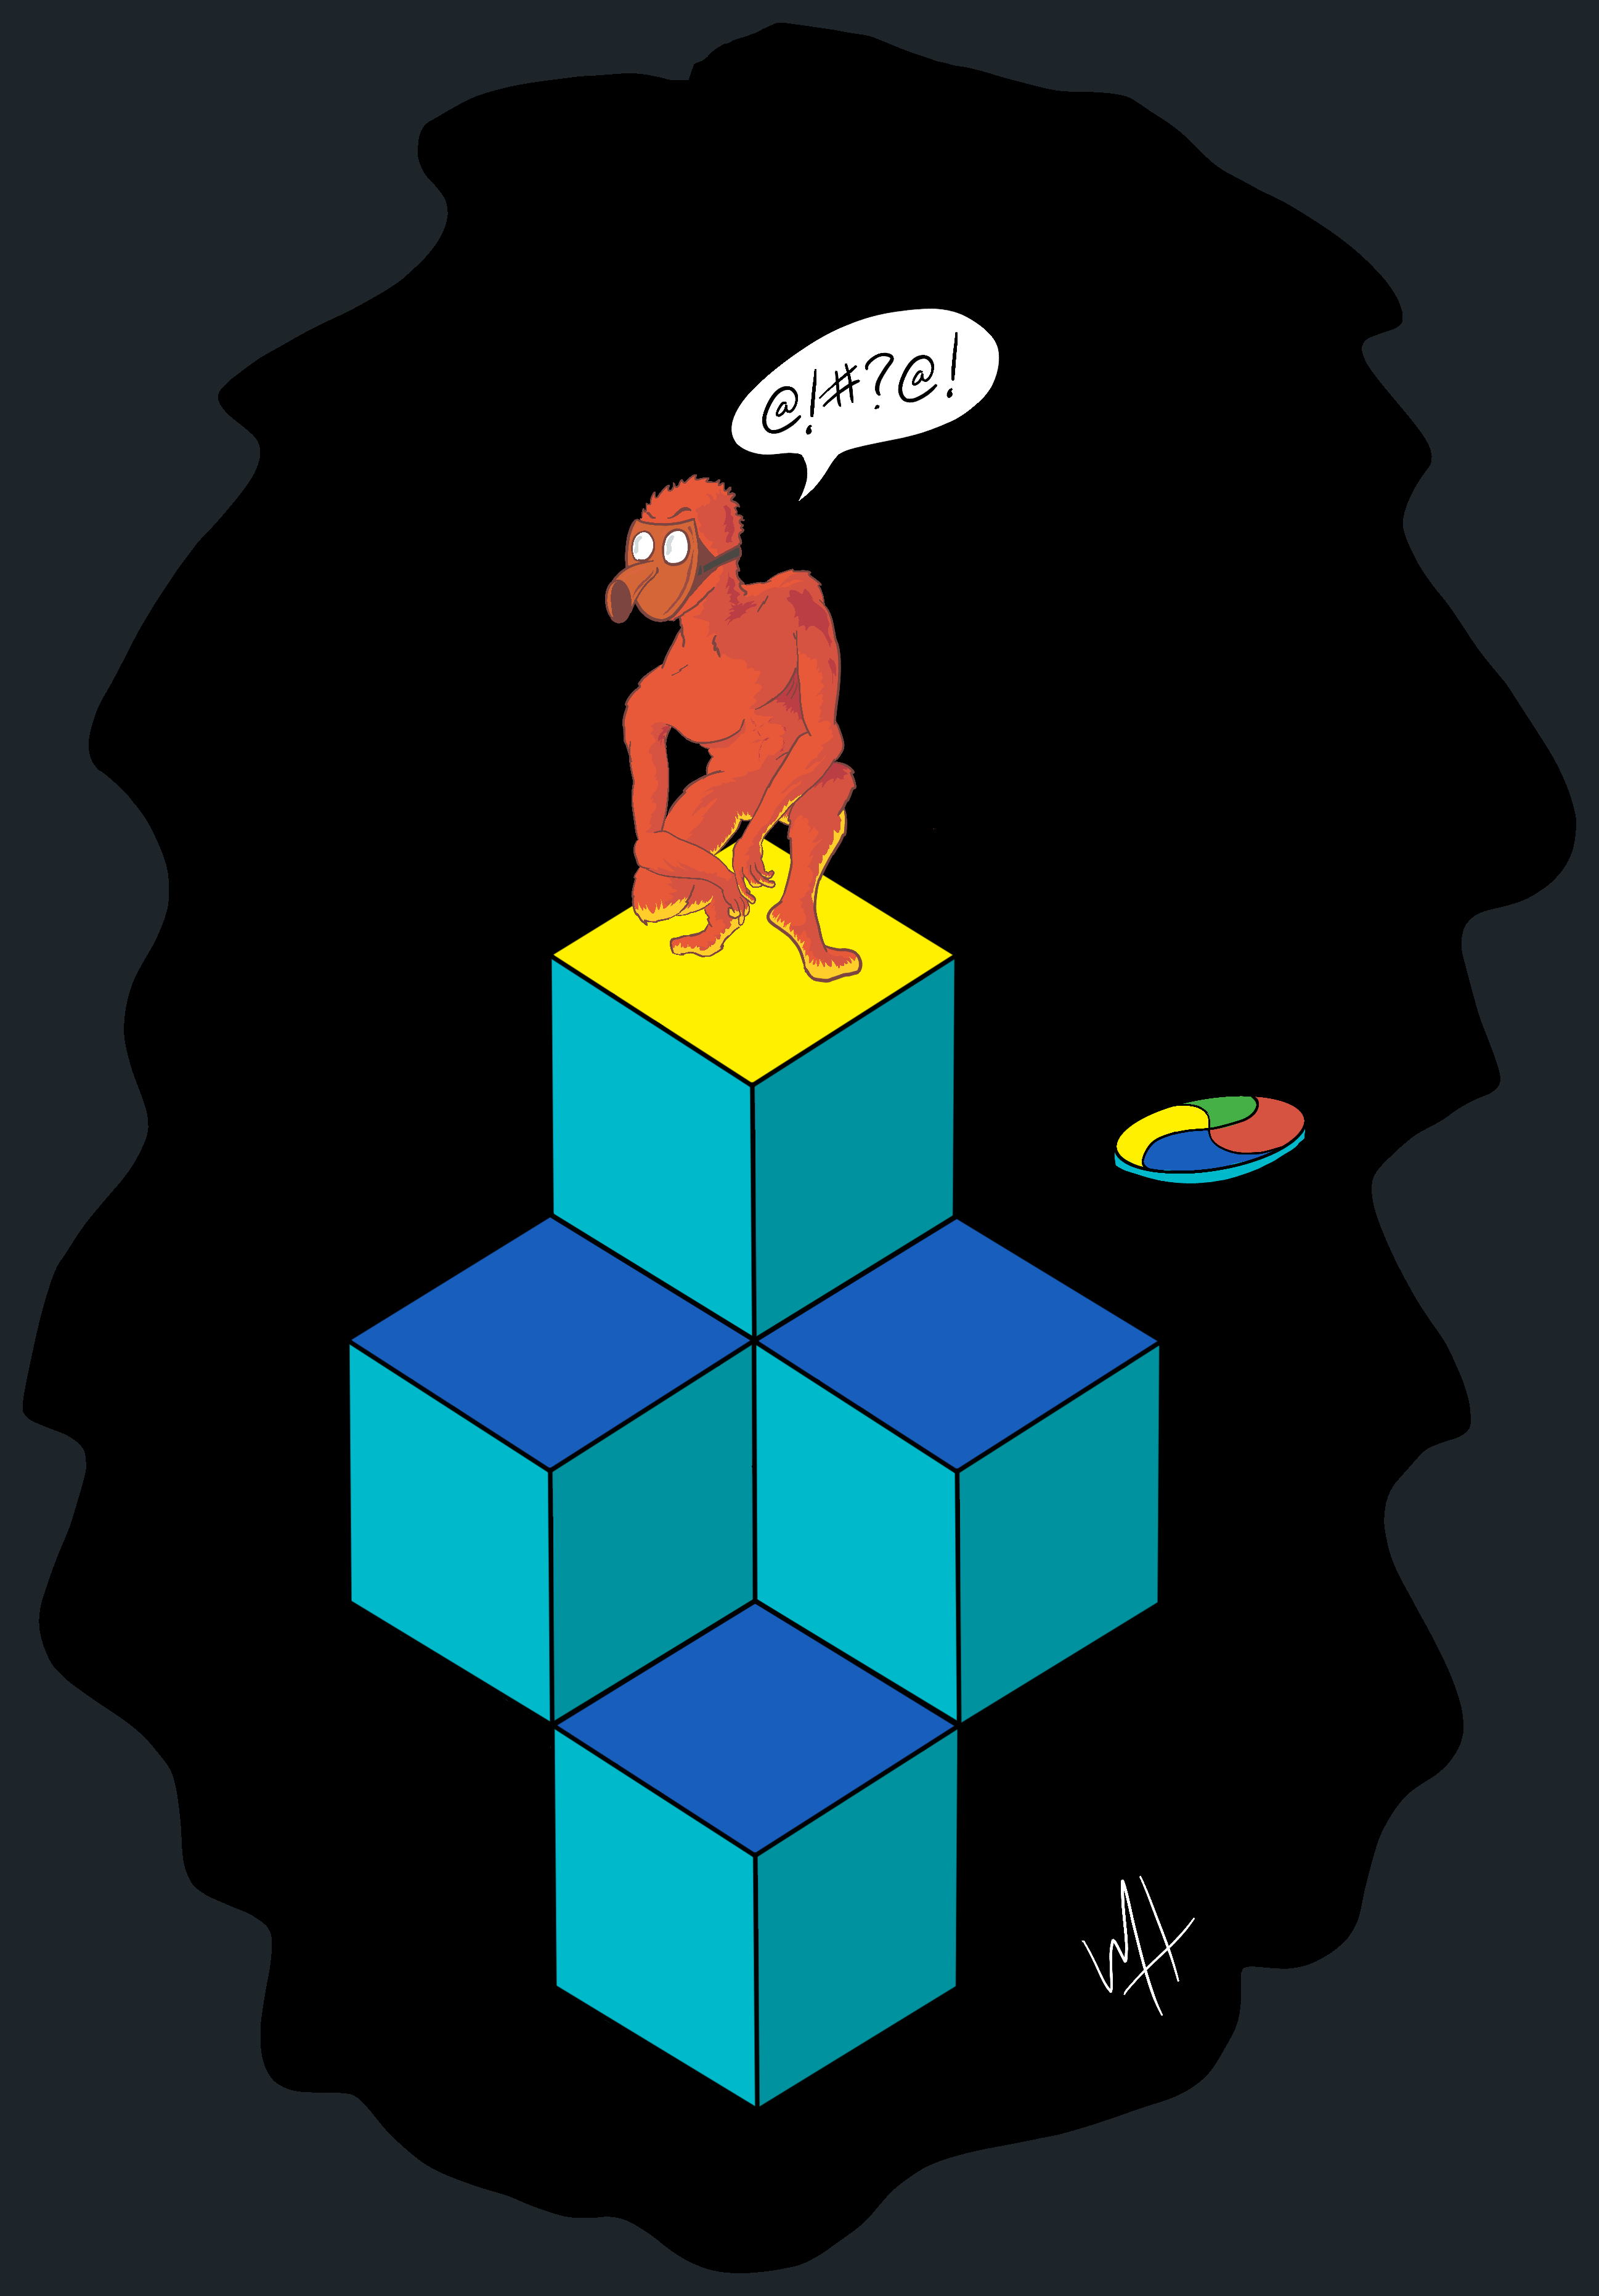 A drawing, in comic book style, of qbert sitting on top of his pyramid contemplating his next move. And swearing.